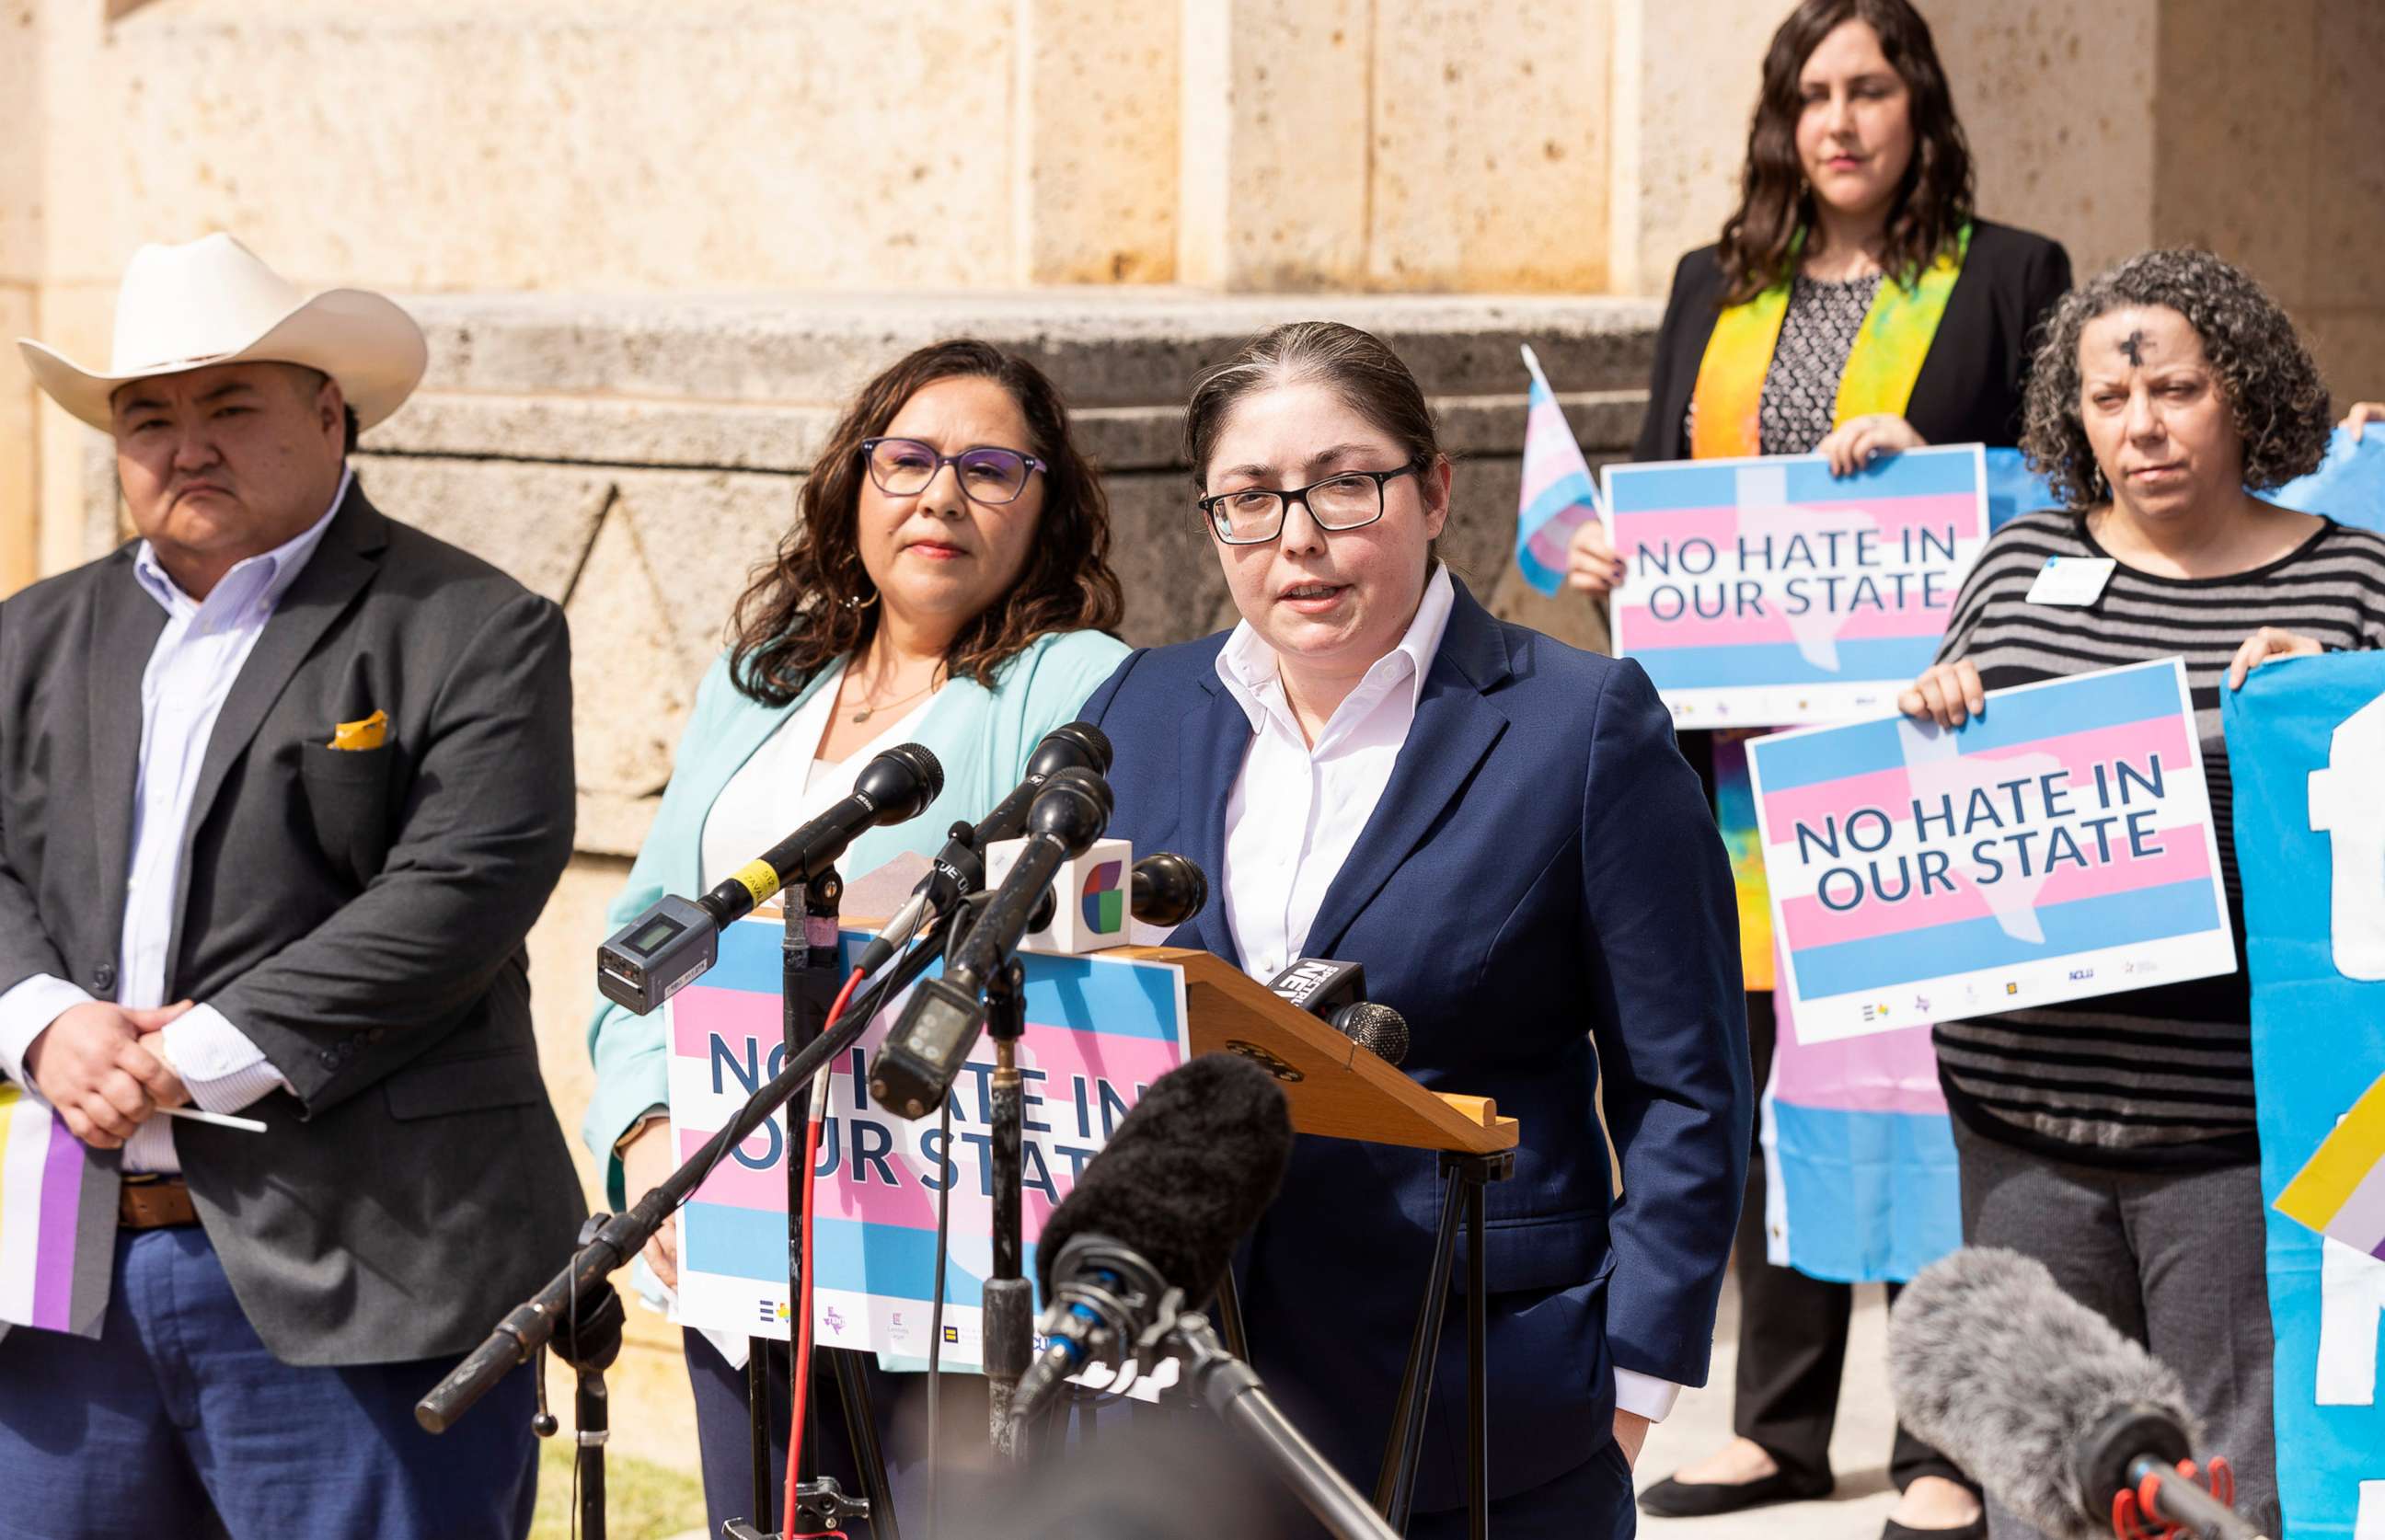 PHOTO: LGBTQ leaders speak outside the Travis County courthouse where a hearing was held to stop the newly mandated child welfare investigations targeting families of transgender children, Mar. 2, 2022 in Austin, Texas.